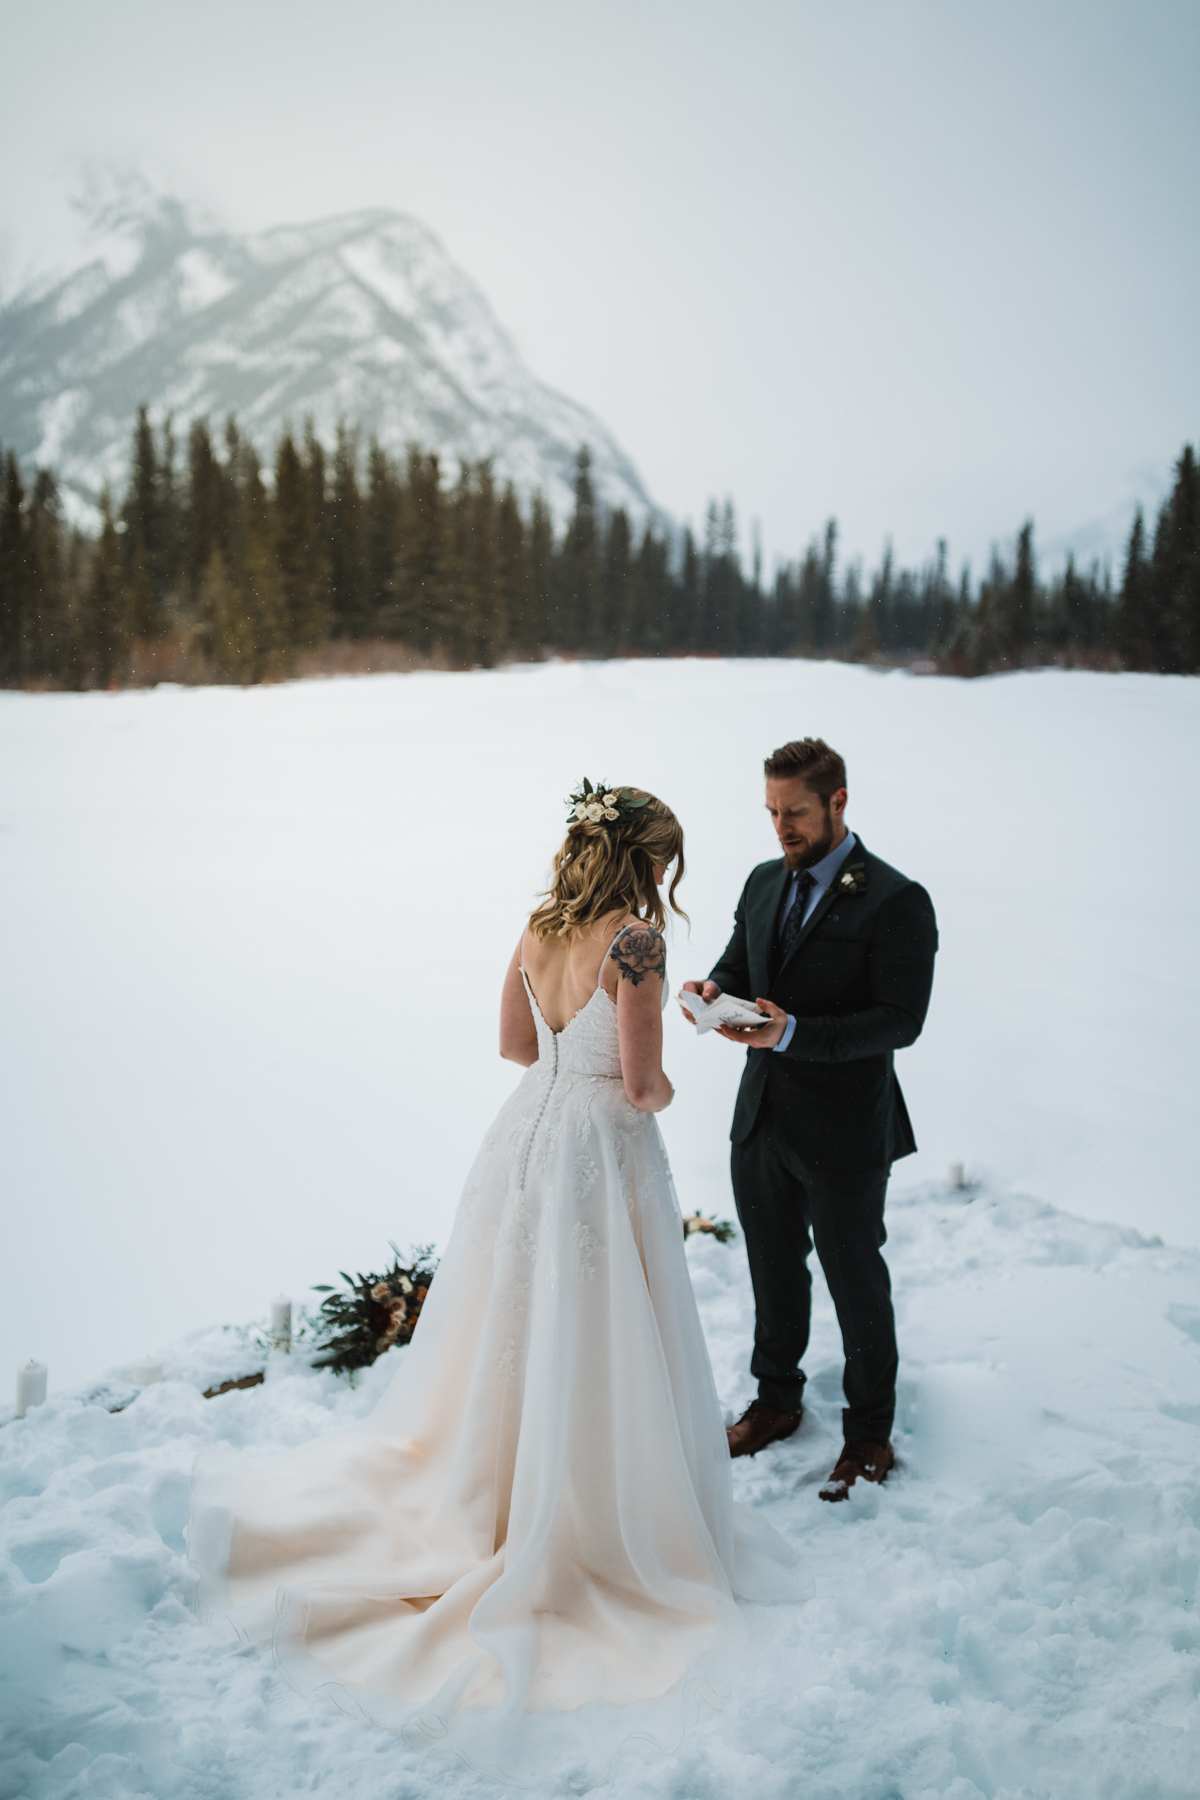 Canmore Elopement Photographer in the Canadian Rockies - Image 23